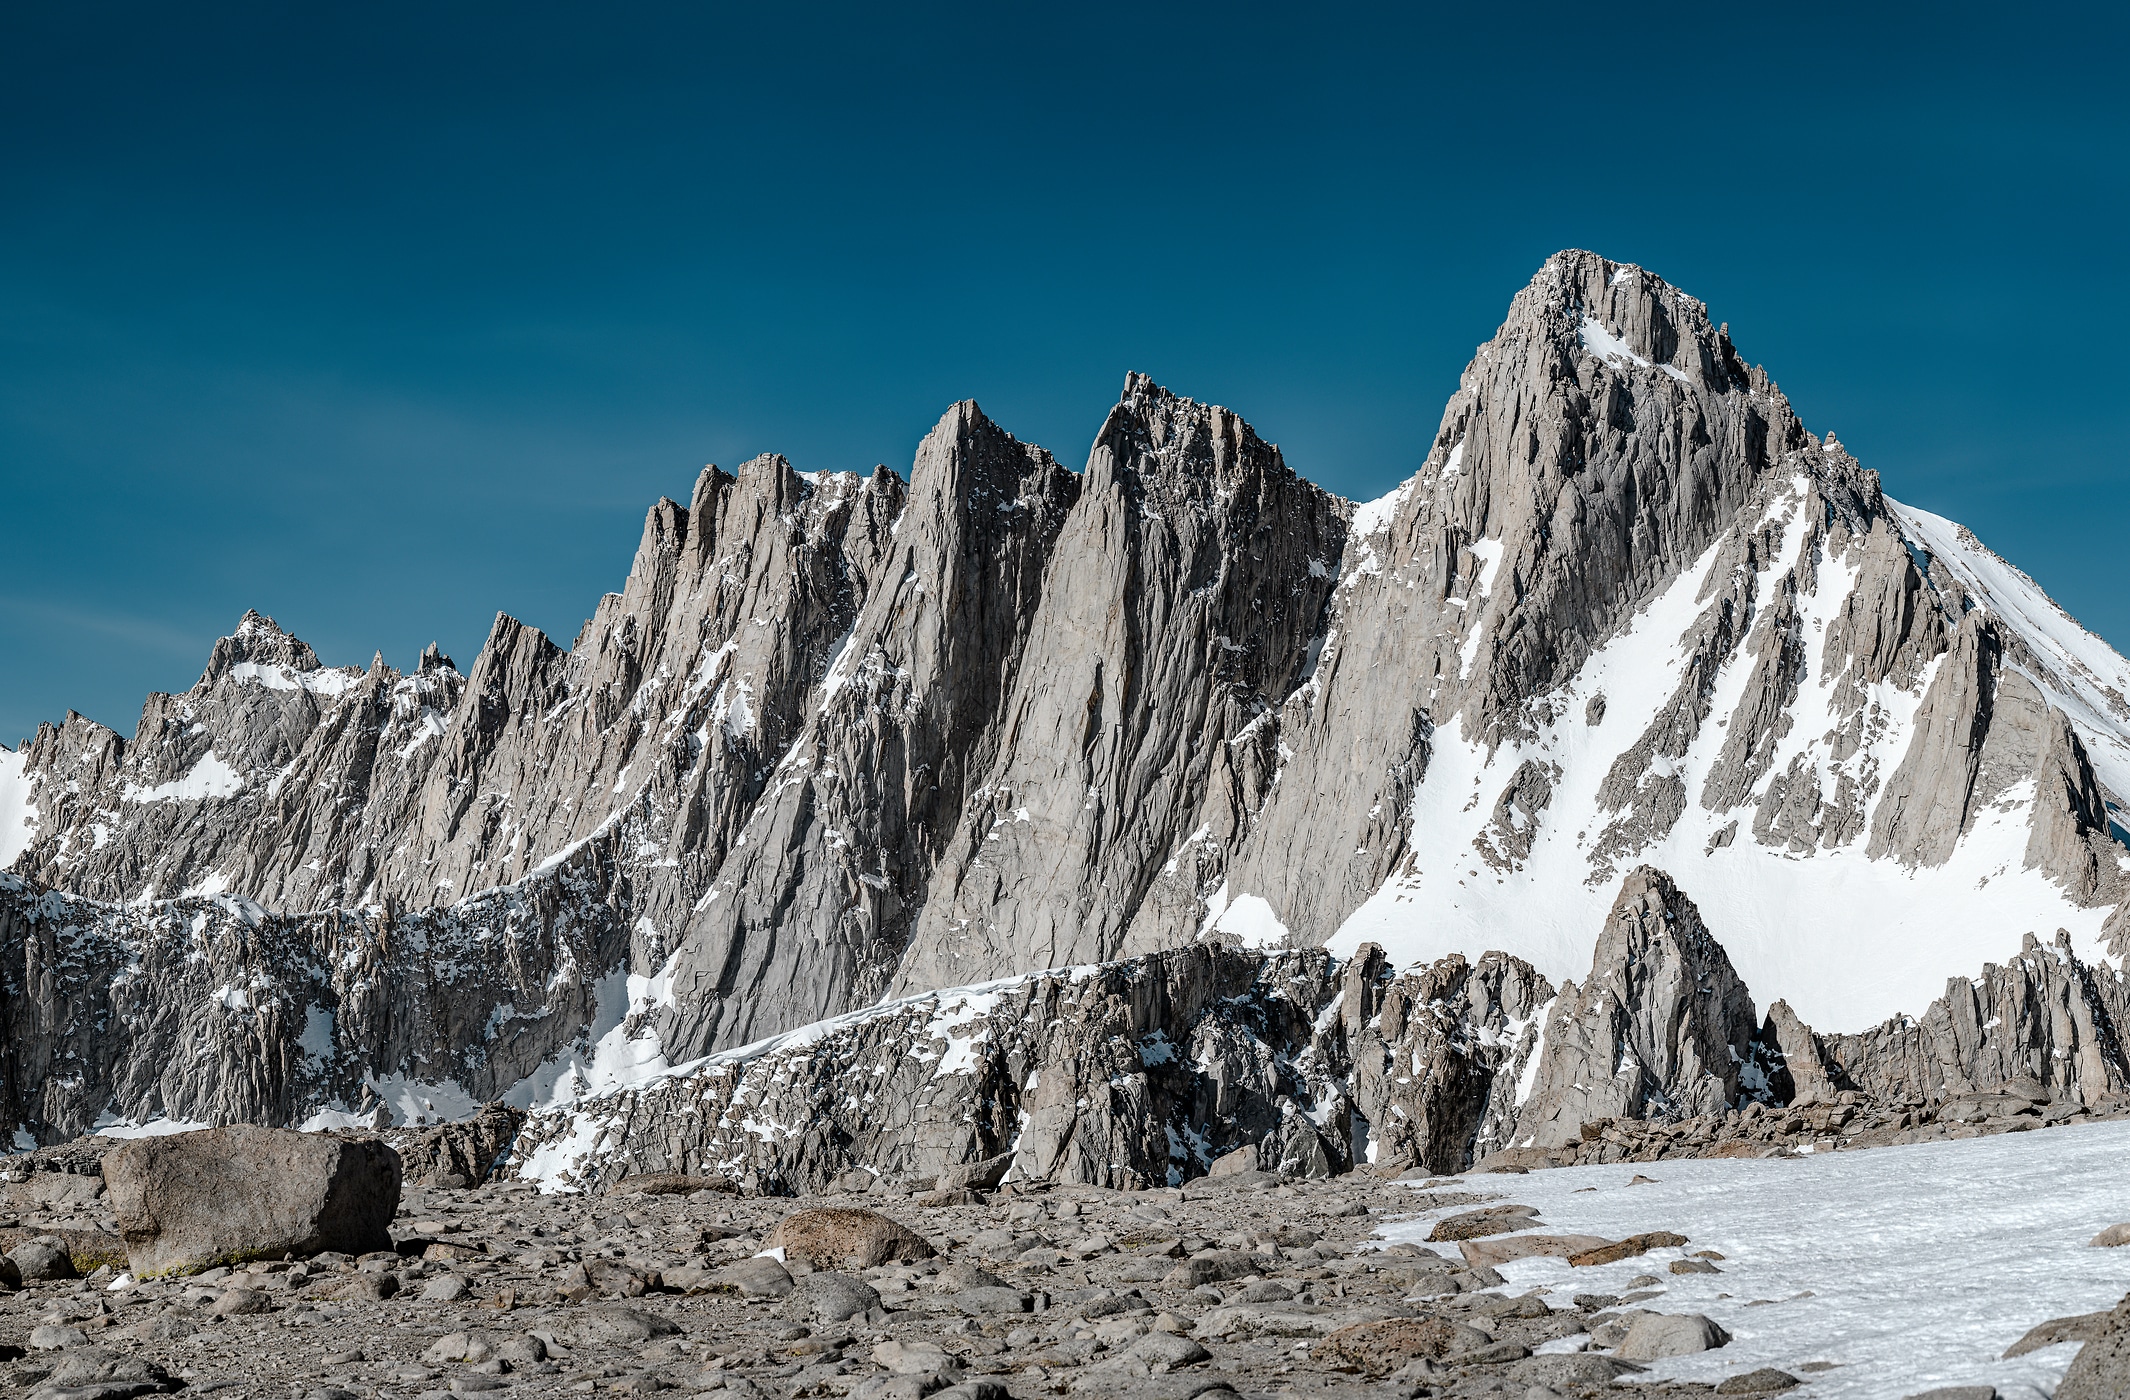 263 megapixels! A very high resolution, large-format VAST photo print of Mount Whitney mountain; landscape photograph created by Scott Rinckenberger of Mount Whitney in the Sierra Nevada Mountains, California.